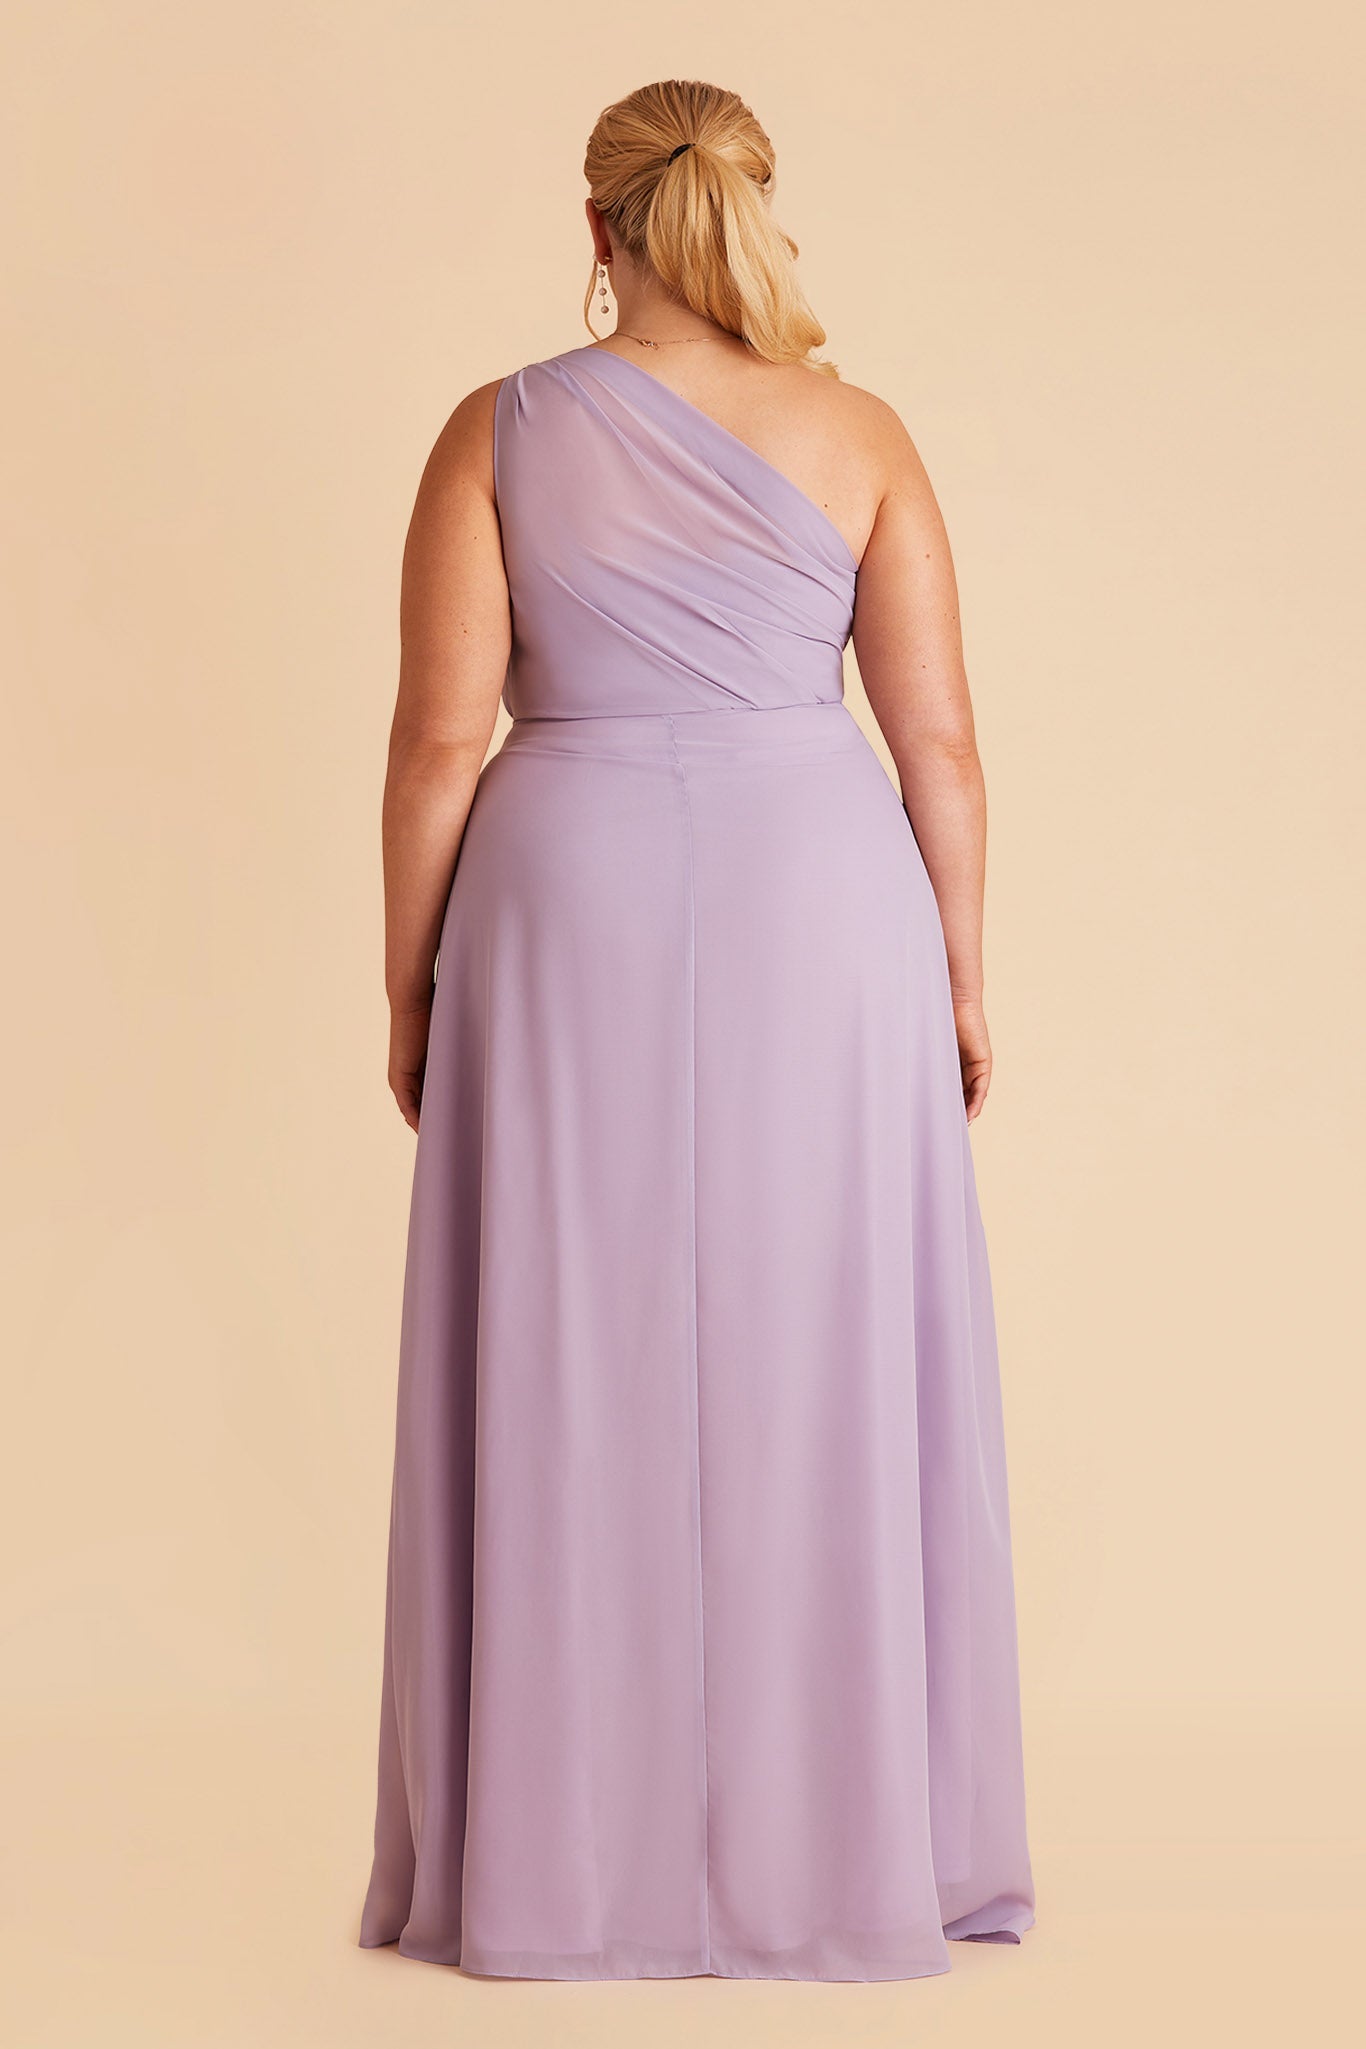 Kira plus size bridesmaid dress with slit in lavender chiffon by Birdy Grey, back view